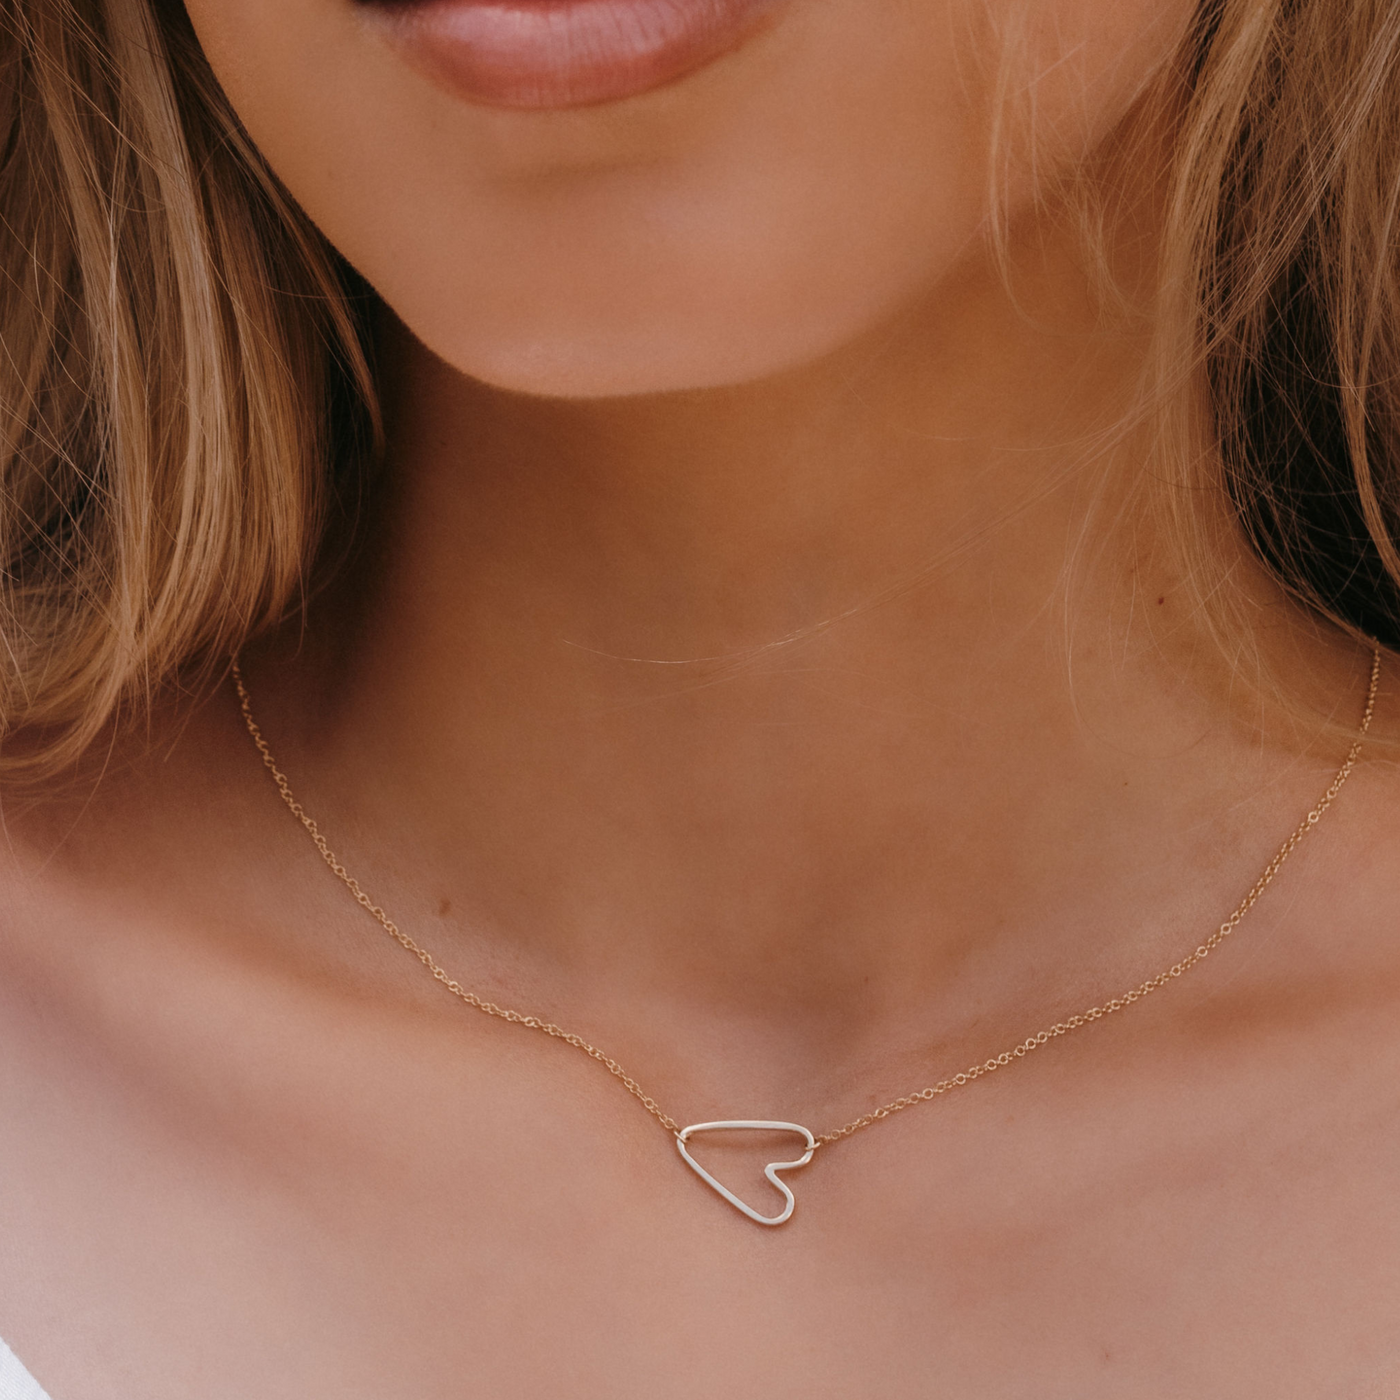 gold open heart necklace